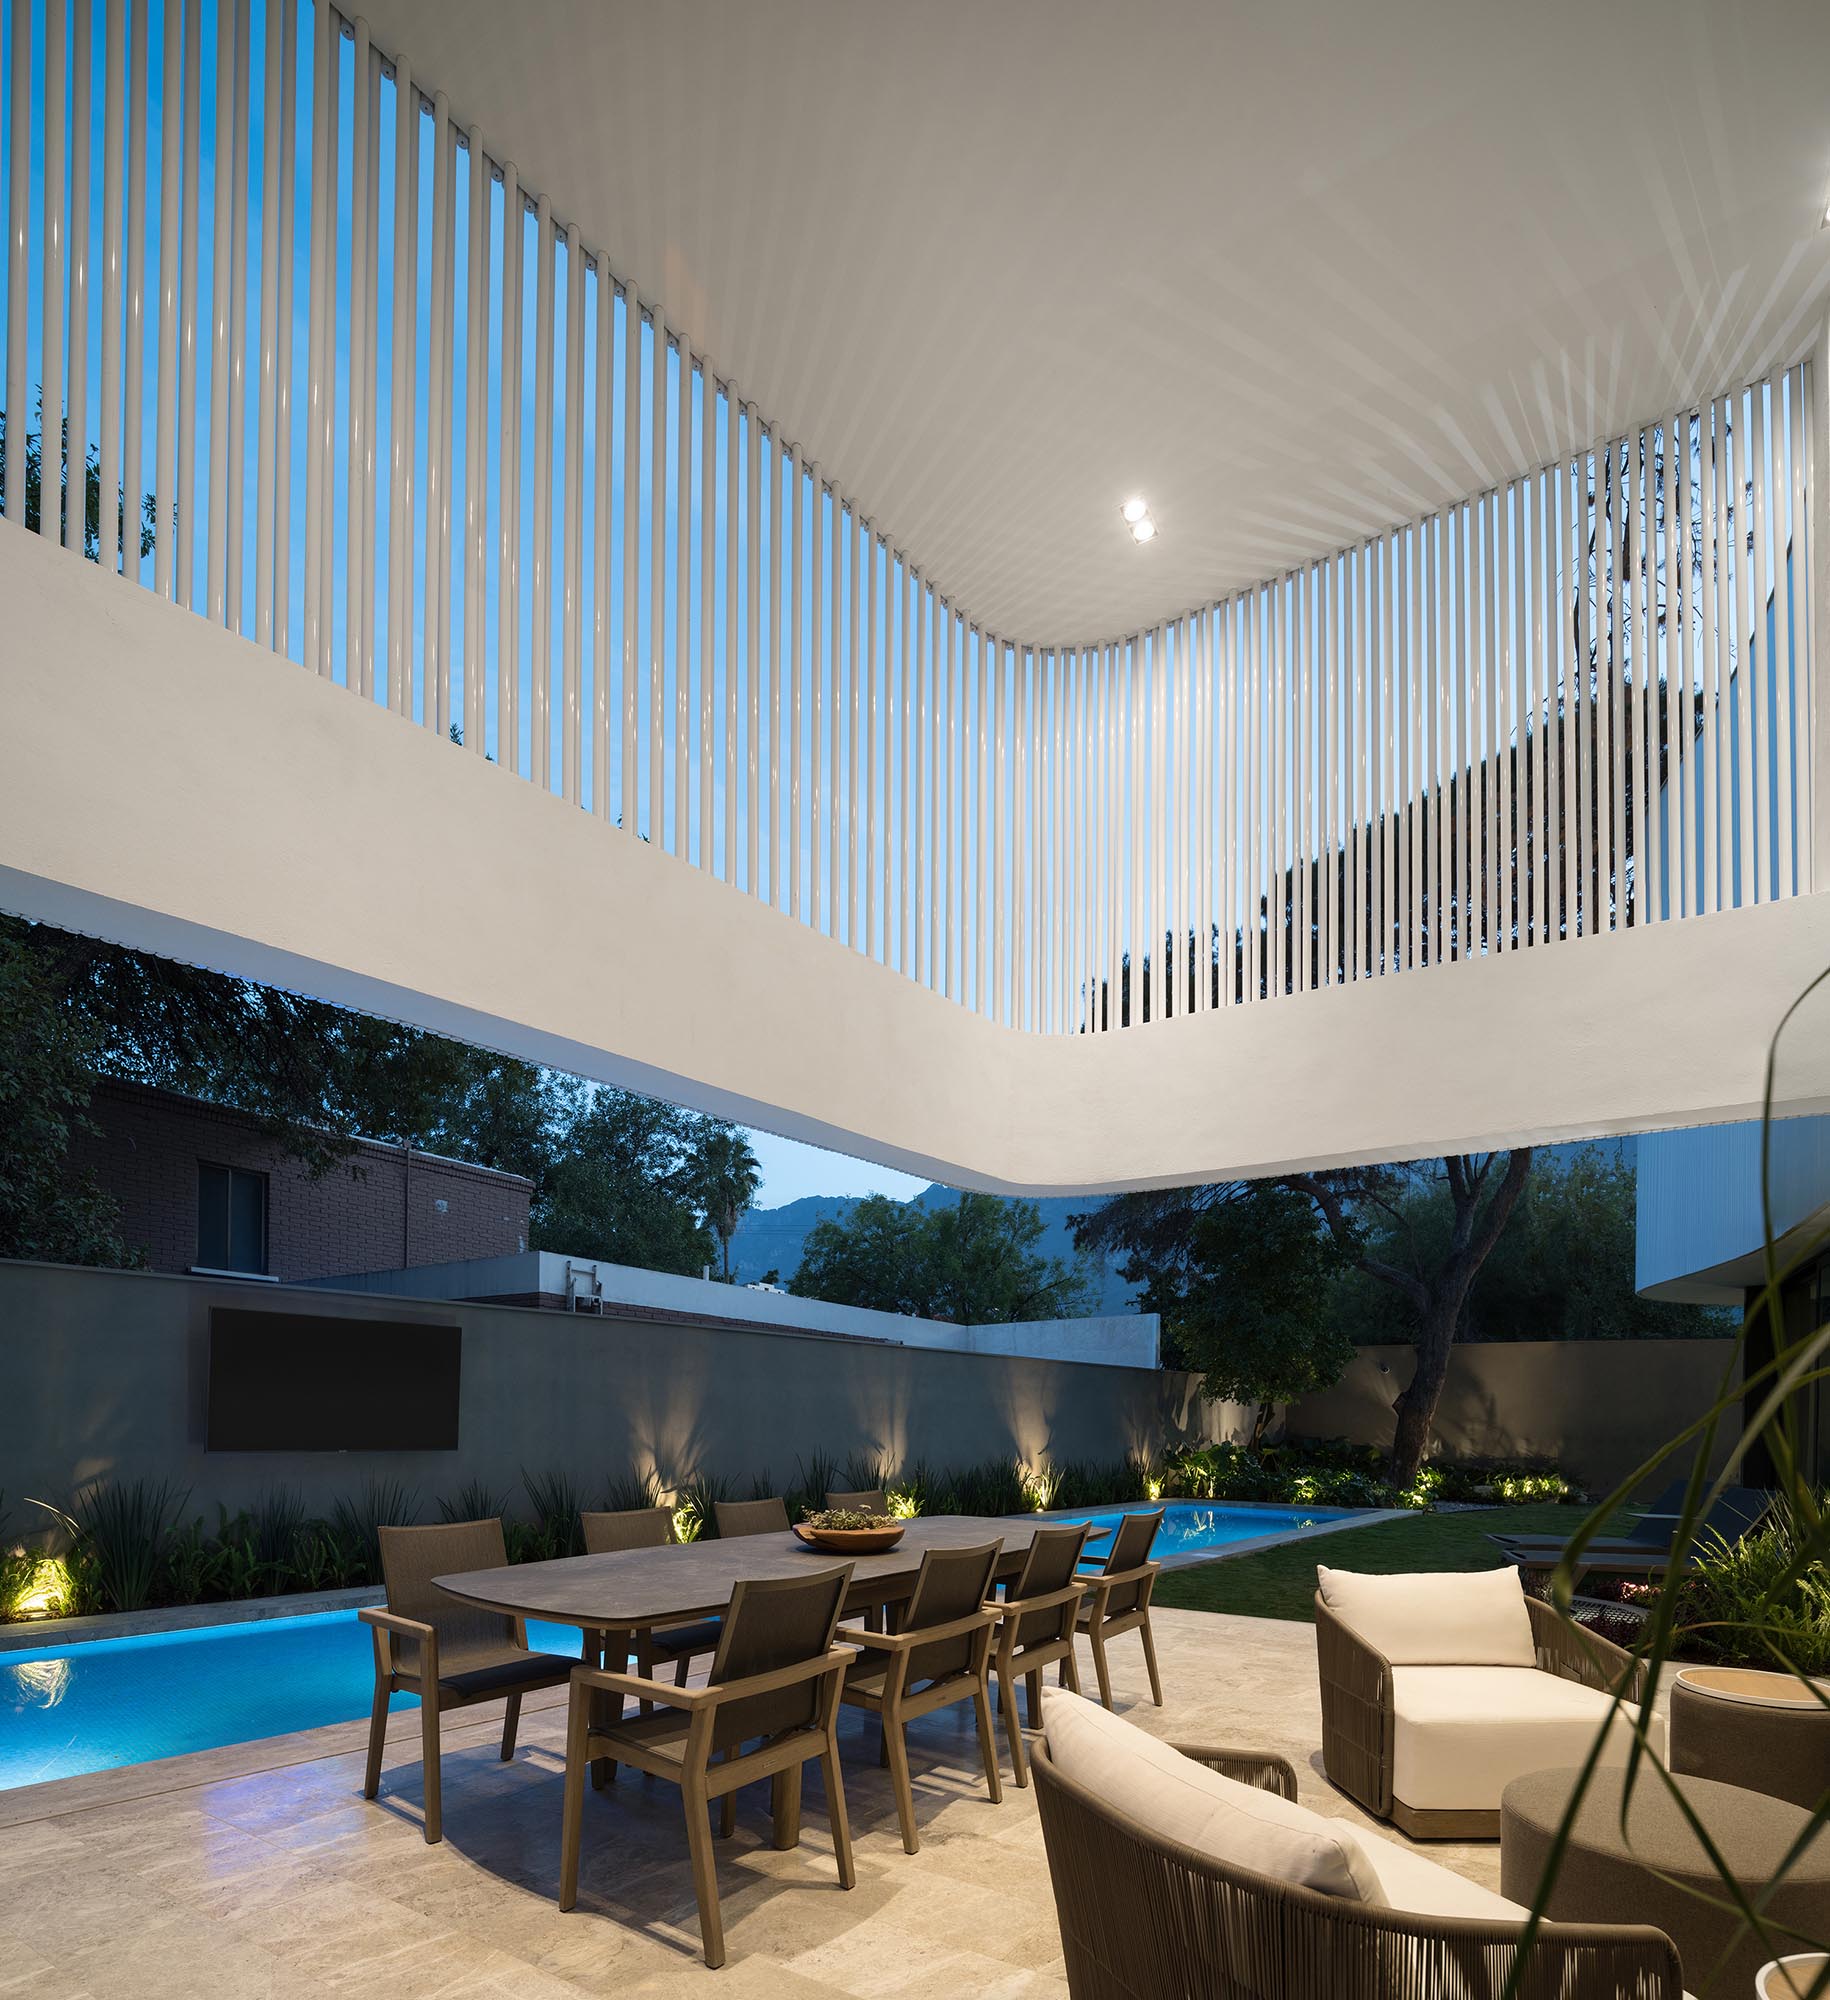 A cantilevered concrete ribbon wrapped in pipes provides shade to an outdoor seating and dining area.